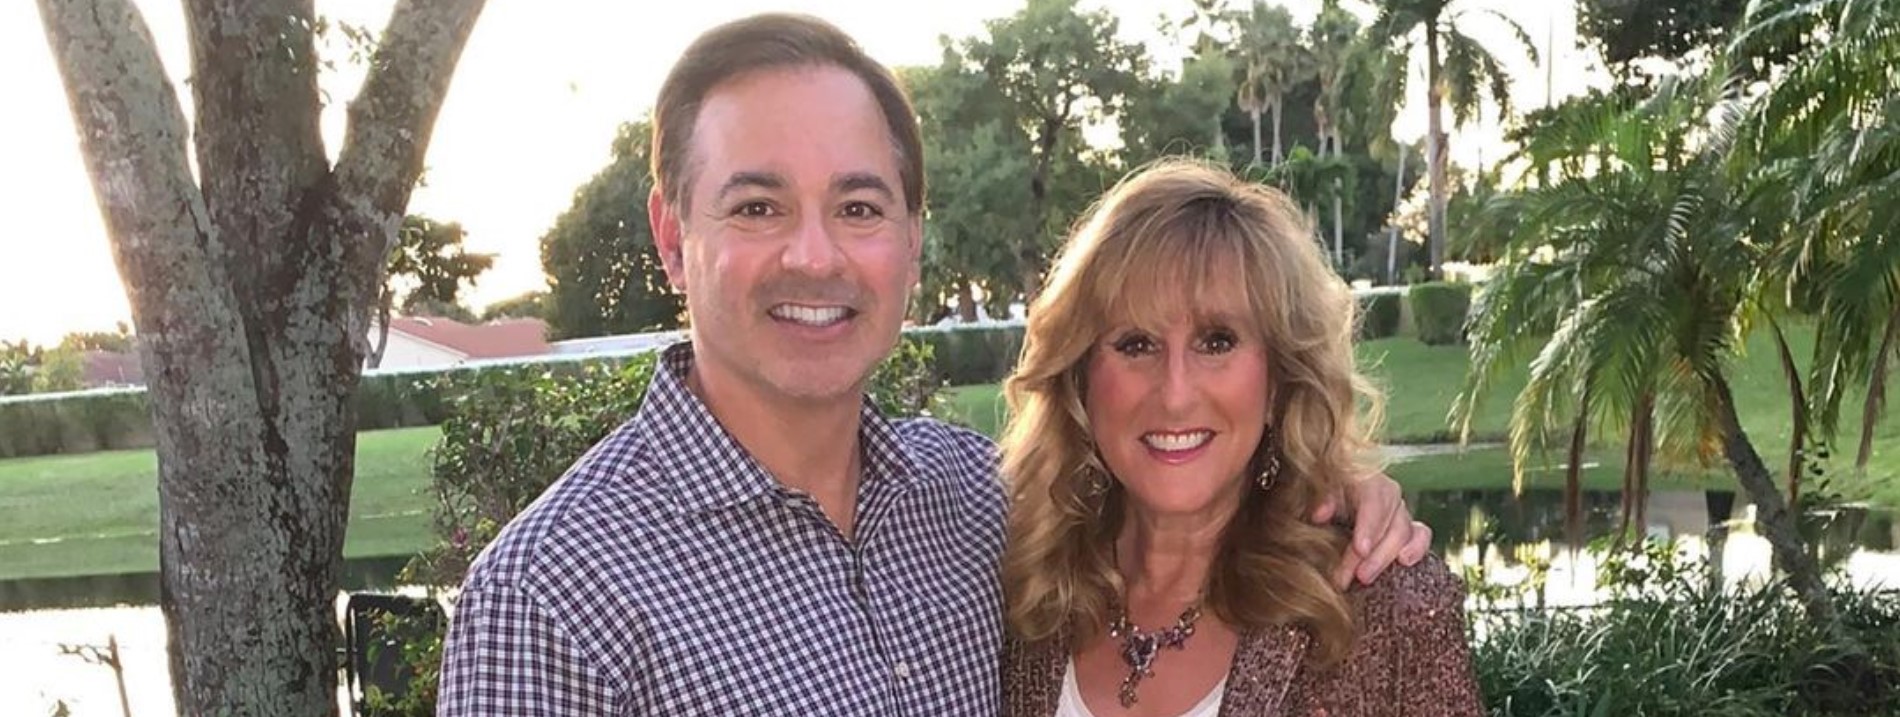 Who Are Jazz Jennings’ Parents? What Do They Do For A Living?